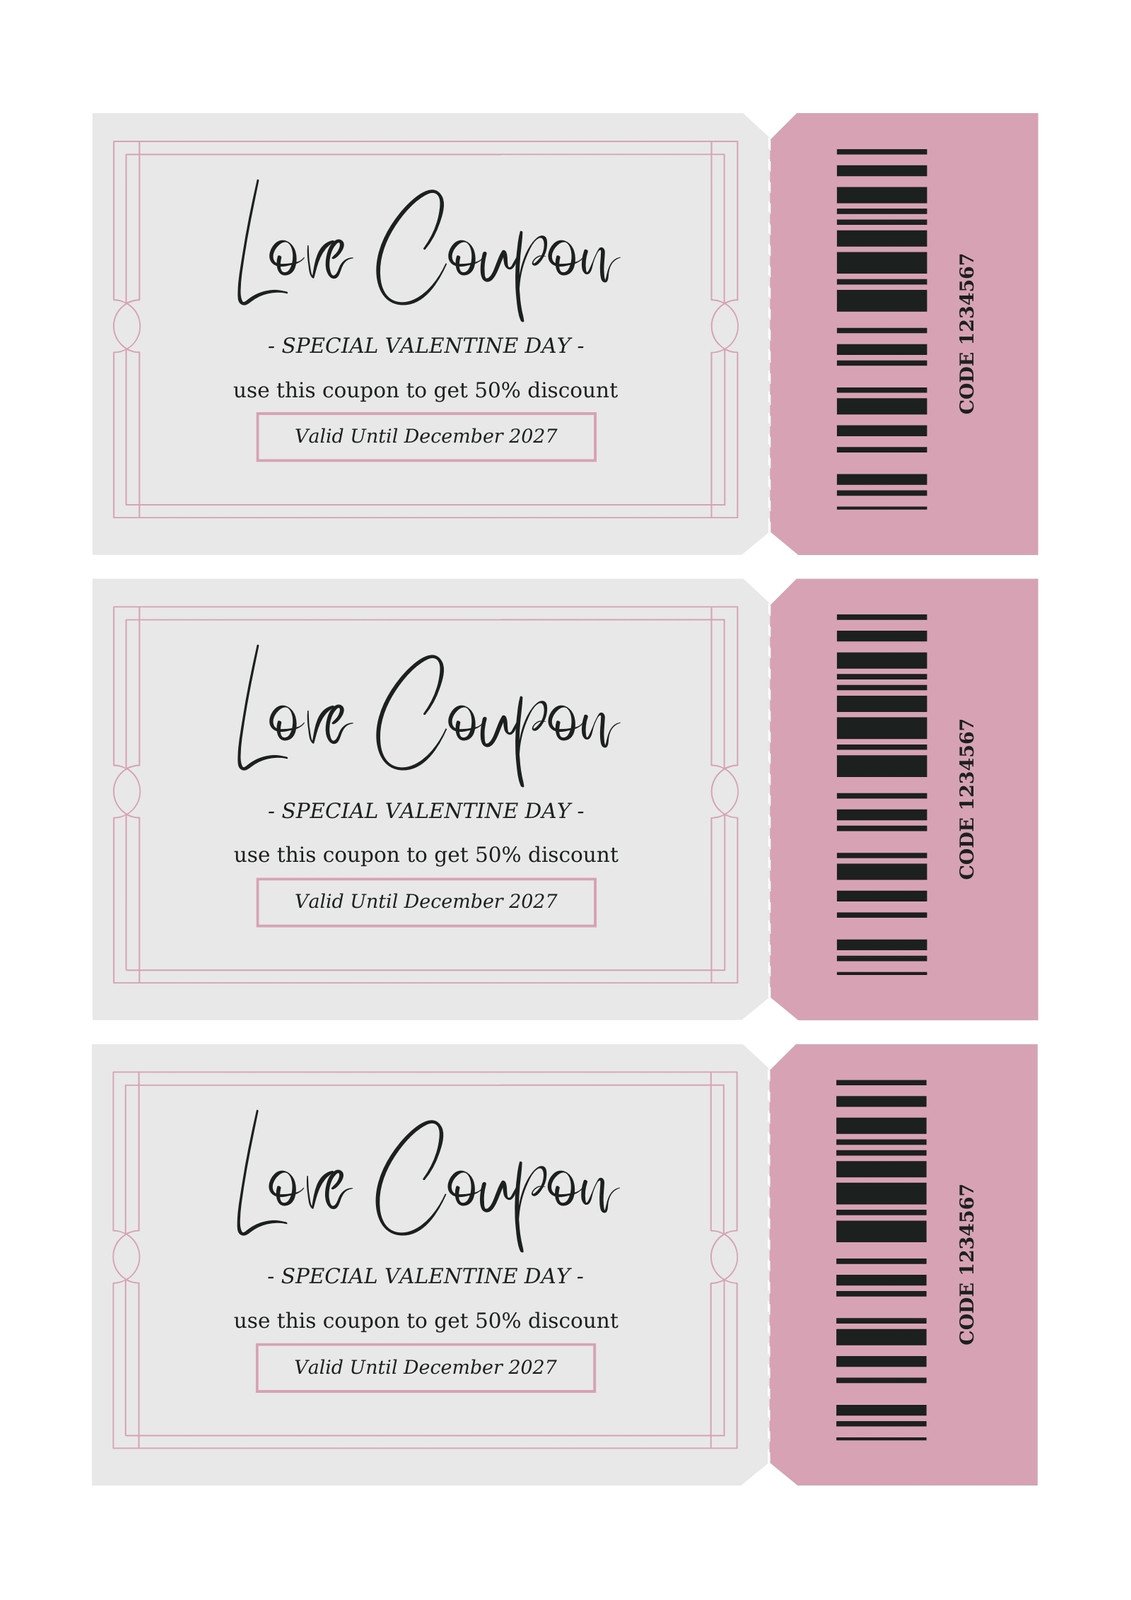 https://marketplace.canva.com/EAFLg1sSAaQ/1/0/1131w/canva-white-beige-%26-pink-simple-love-coupon-eSNHCO2oomI.jpg